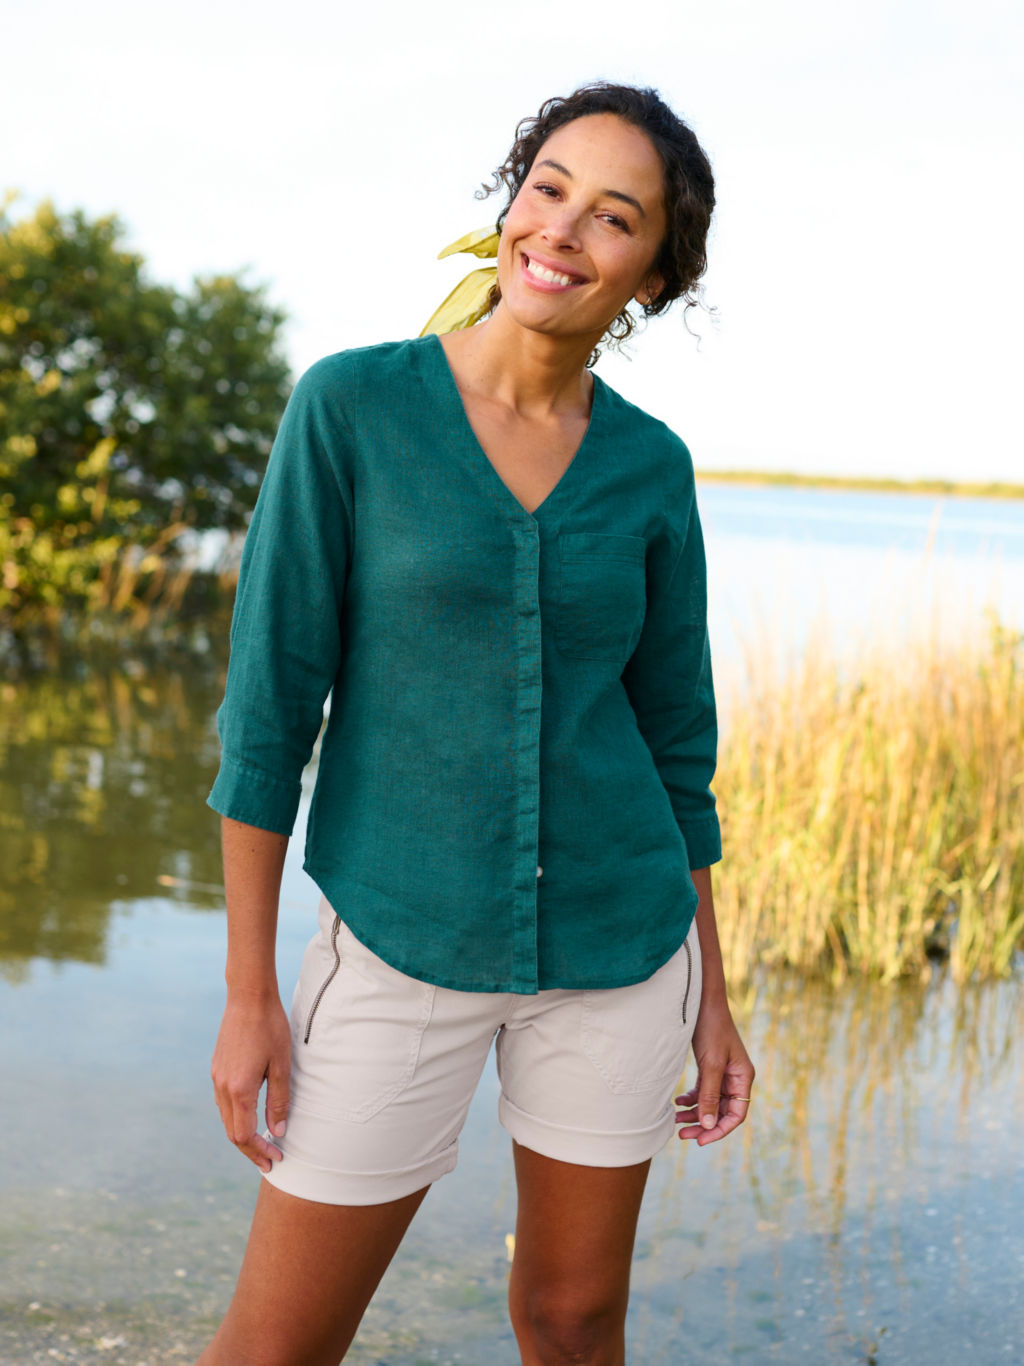 A model wearing a dark green linen shirt and light khaki shorts stands at the edge of a marsh.